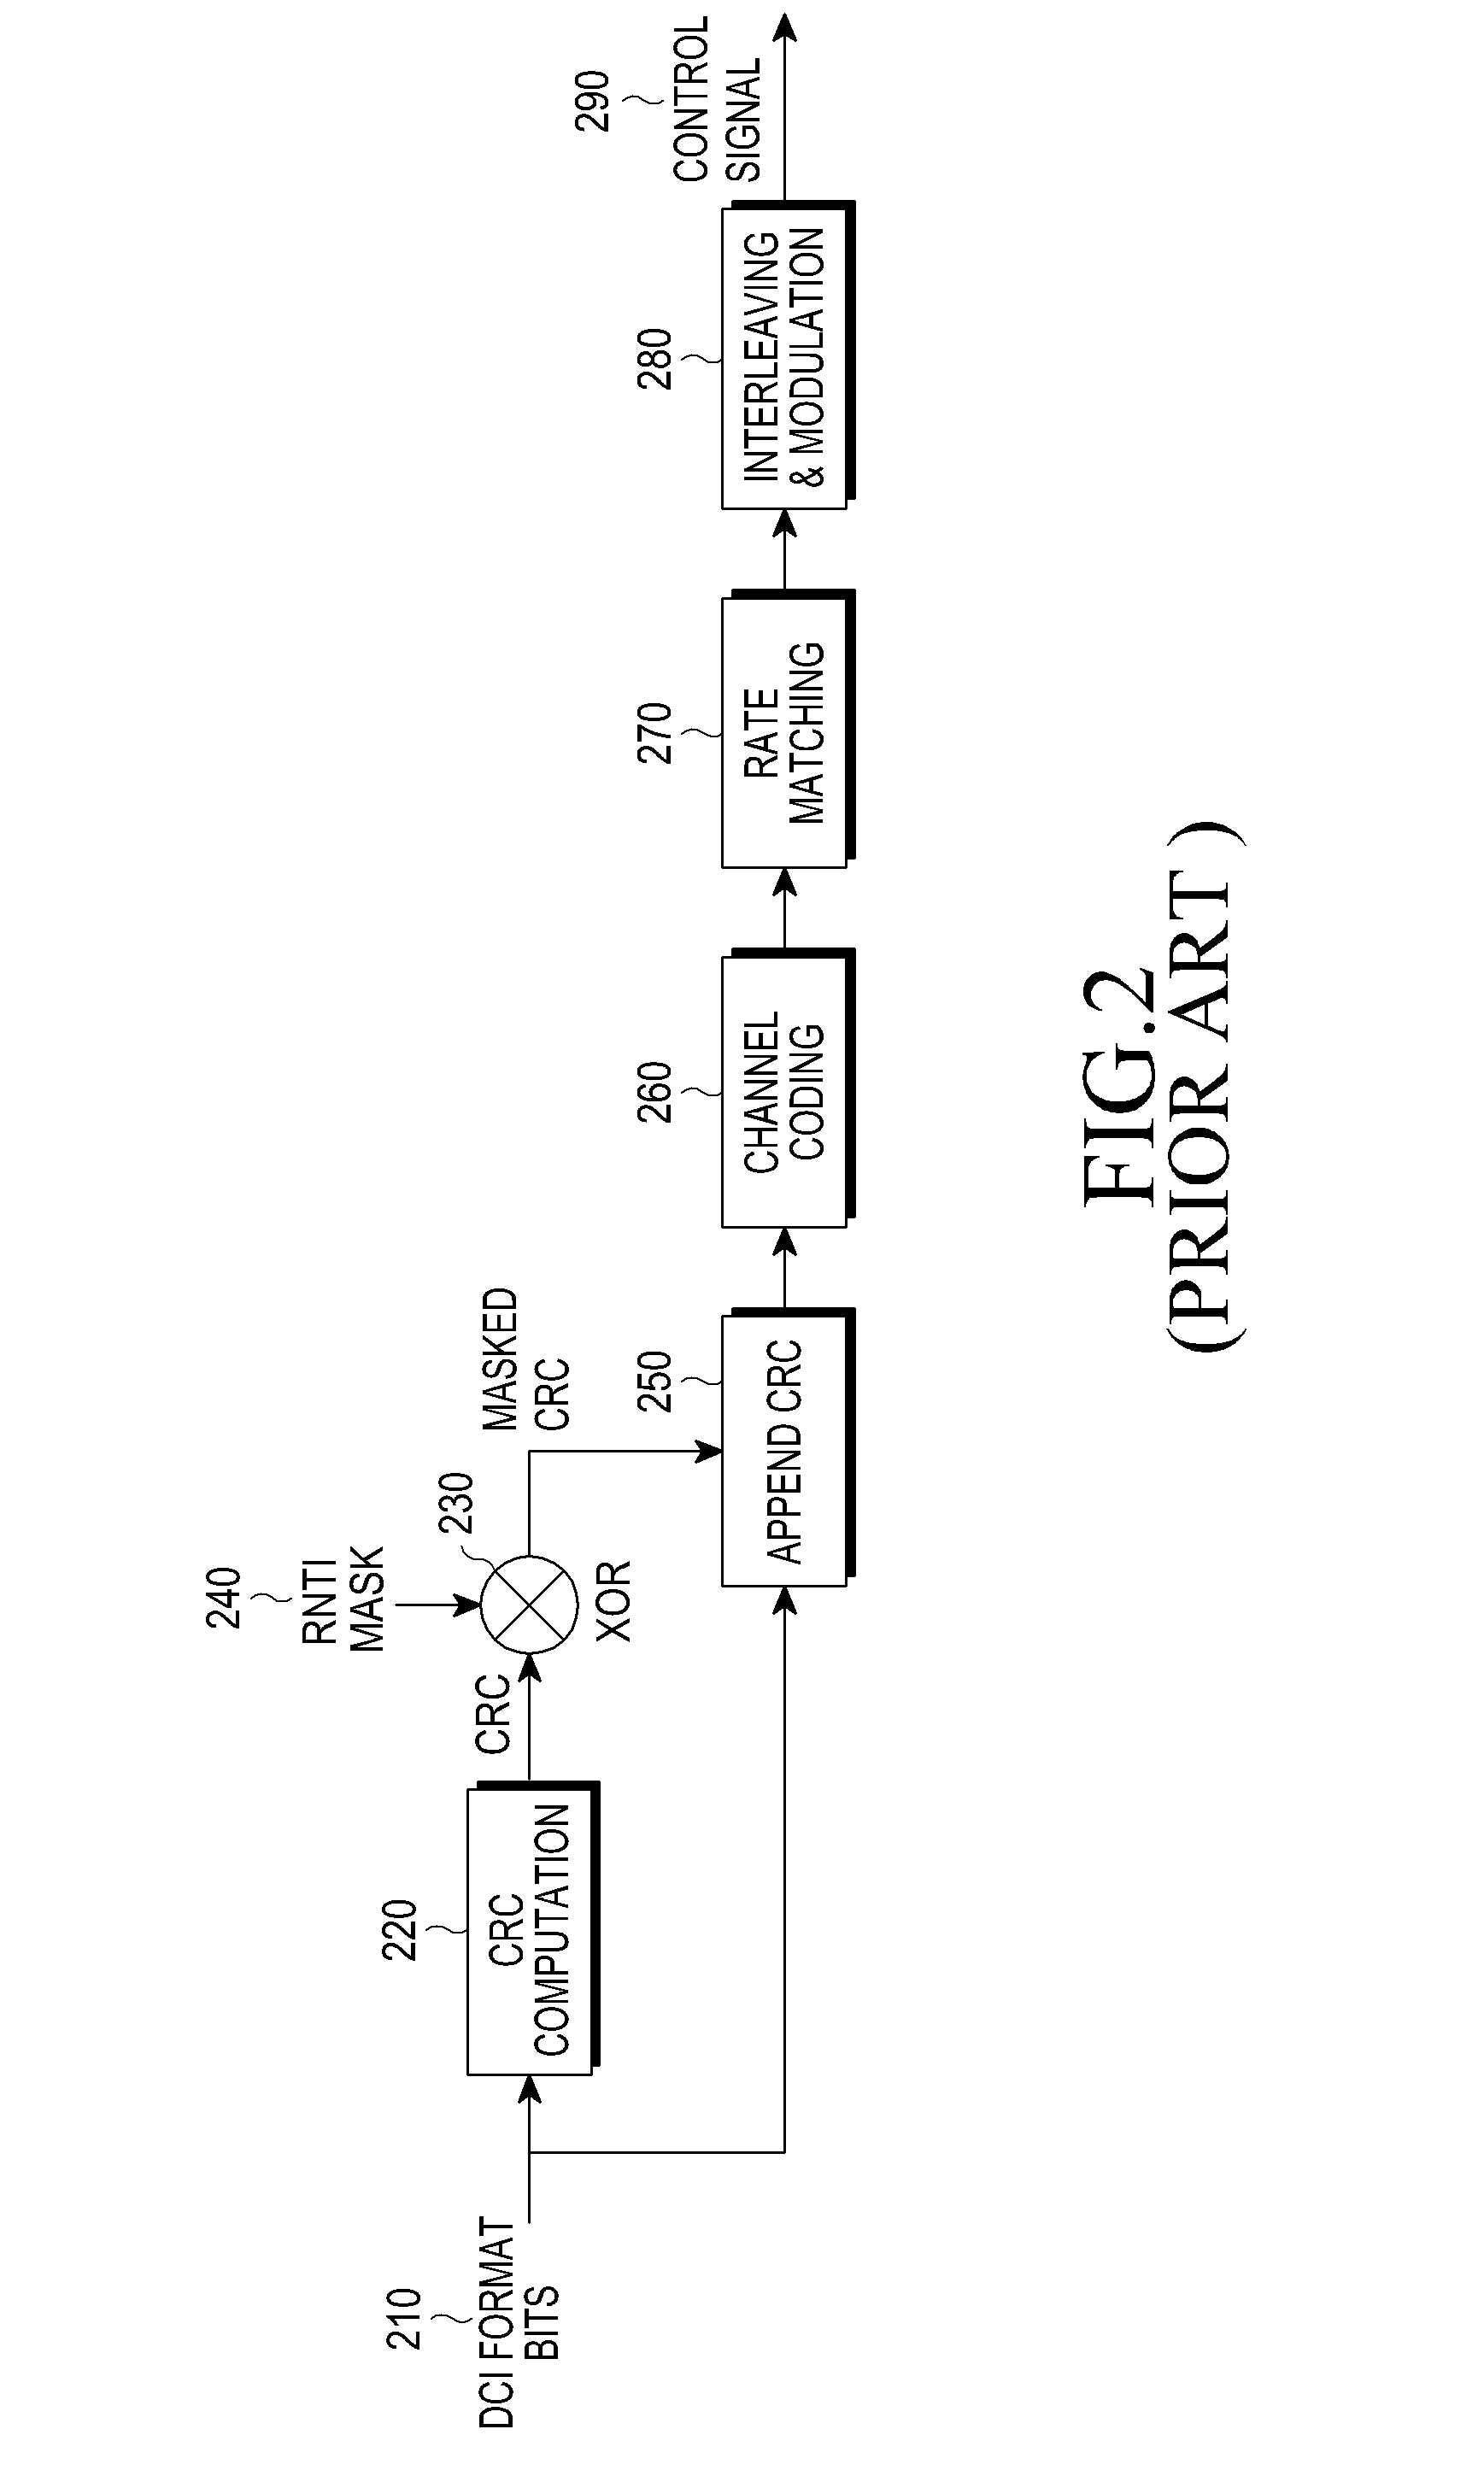 Extension of physical downlink control channels in a communication system